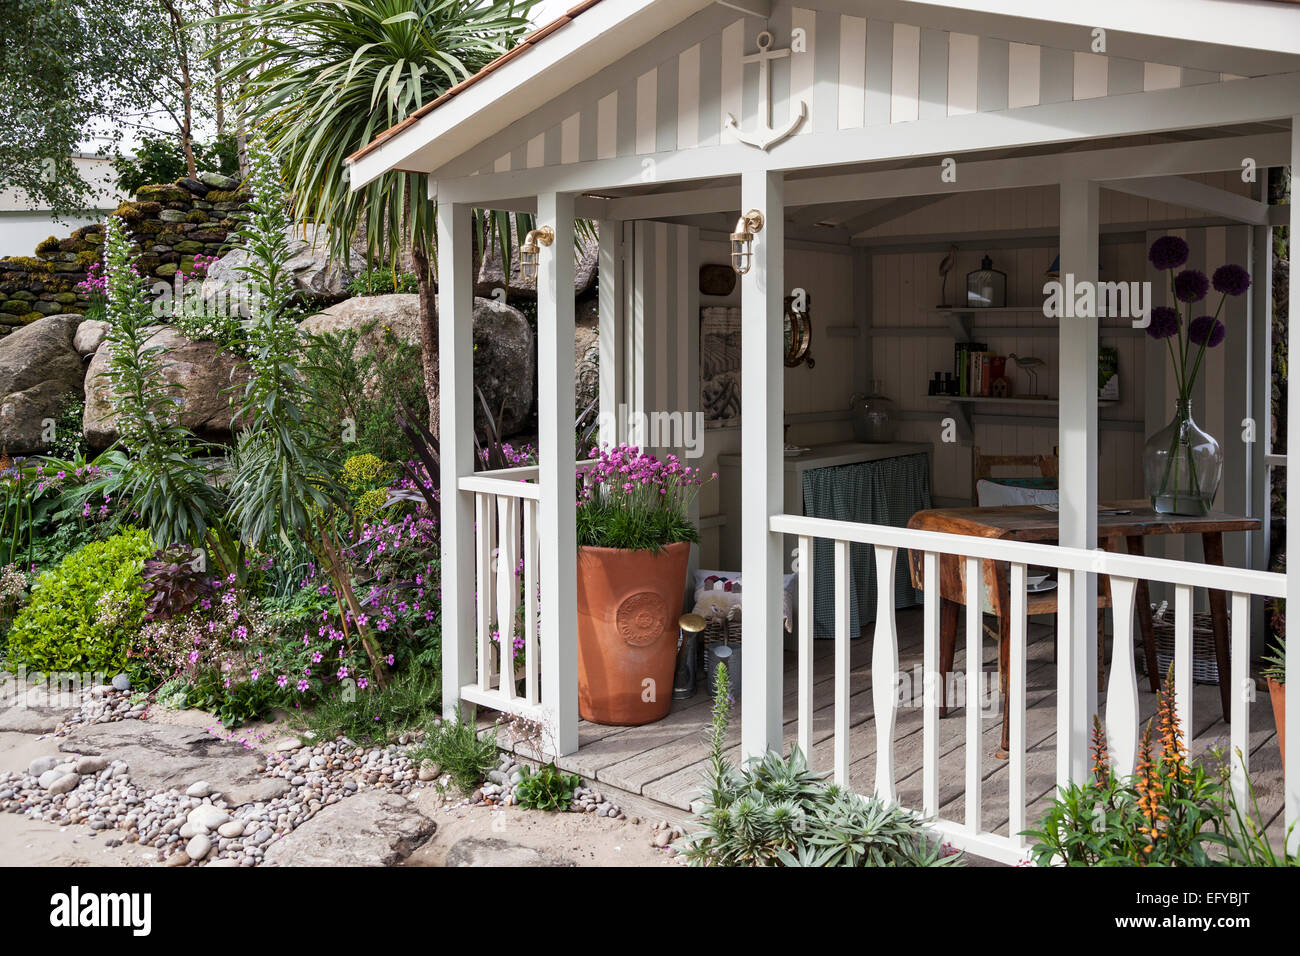 Beach hut or garden house with furnitures and exotic planting featuring Echium piniana 'White tower' Stock Photo